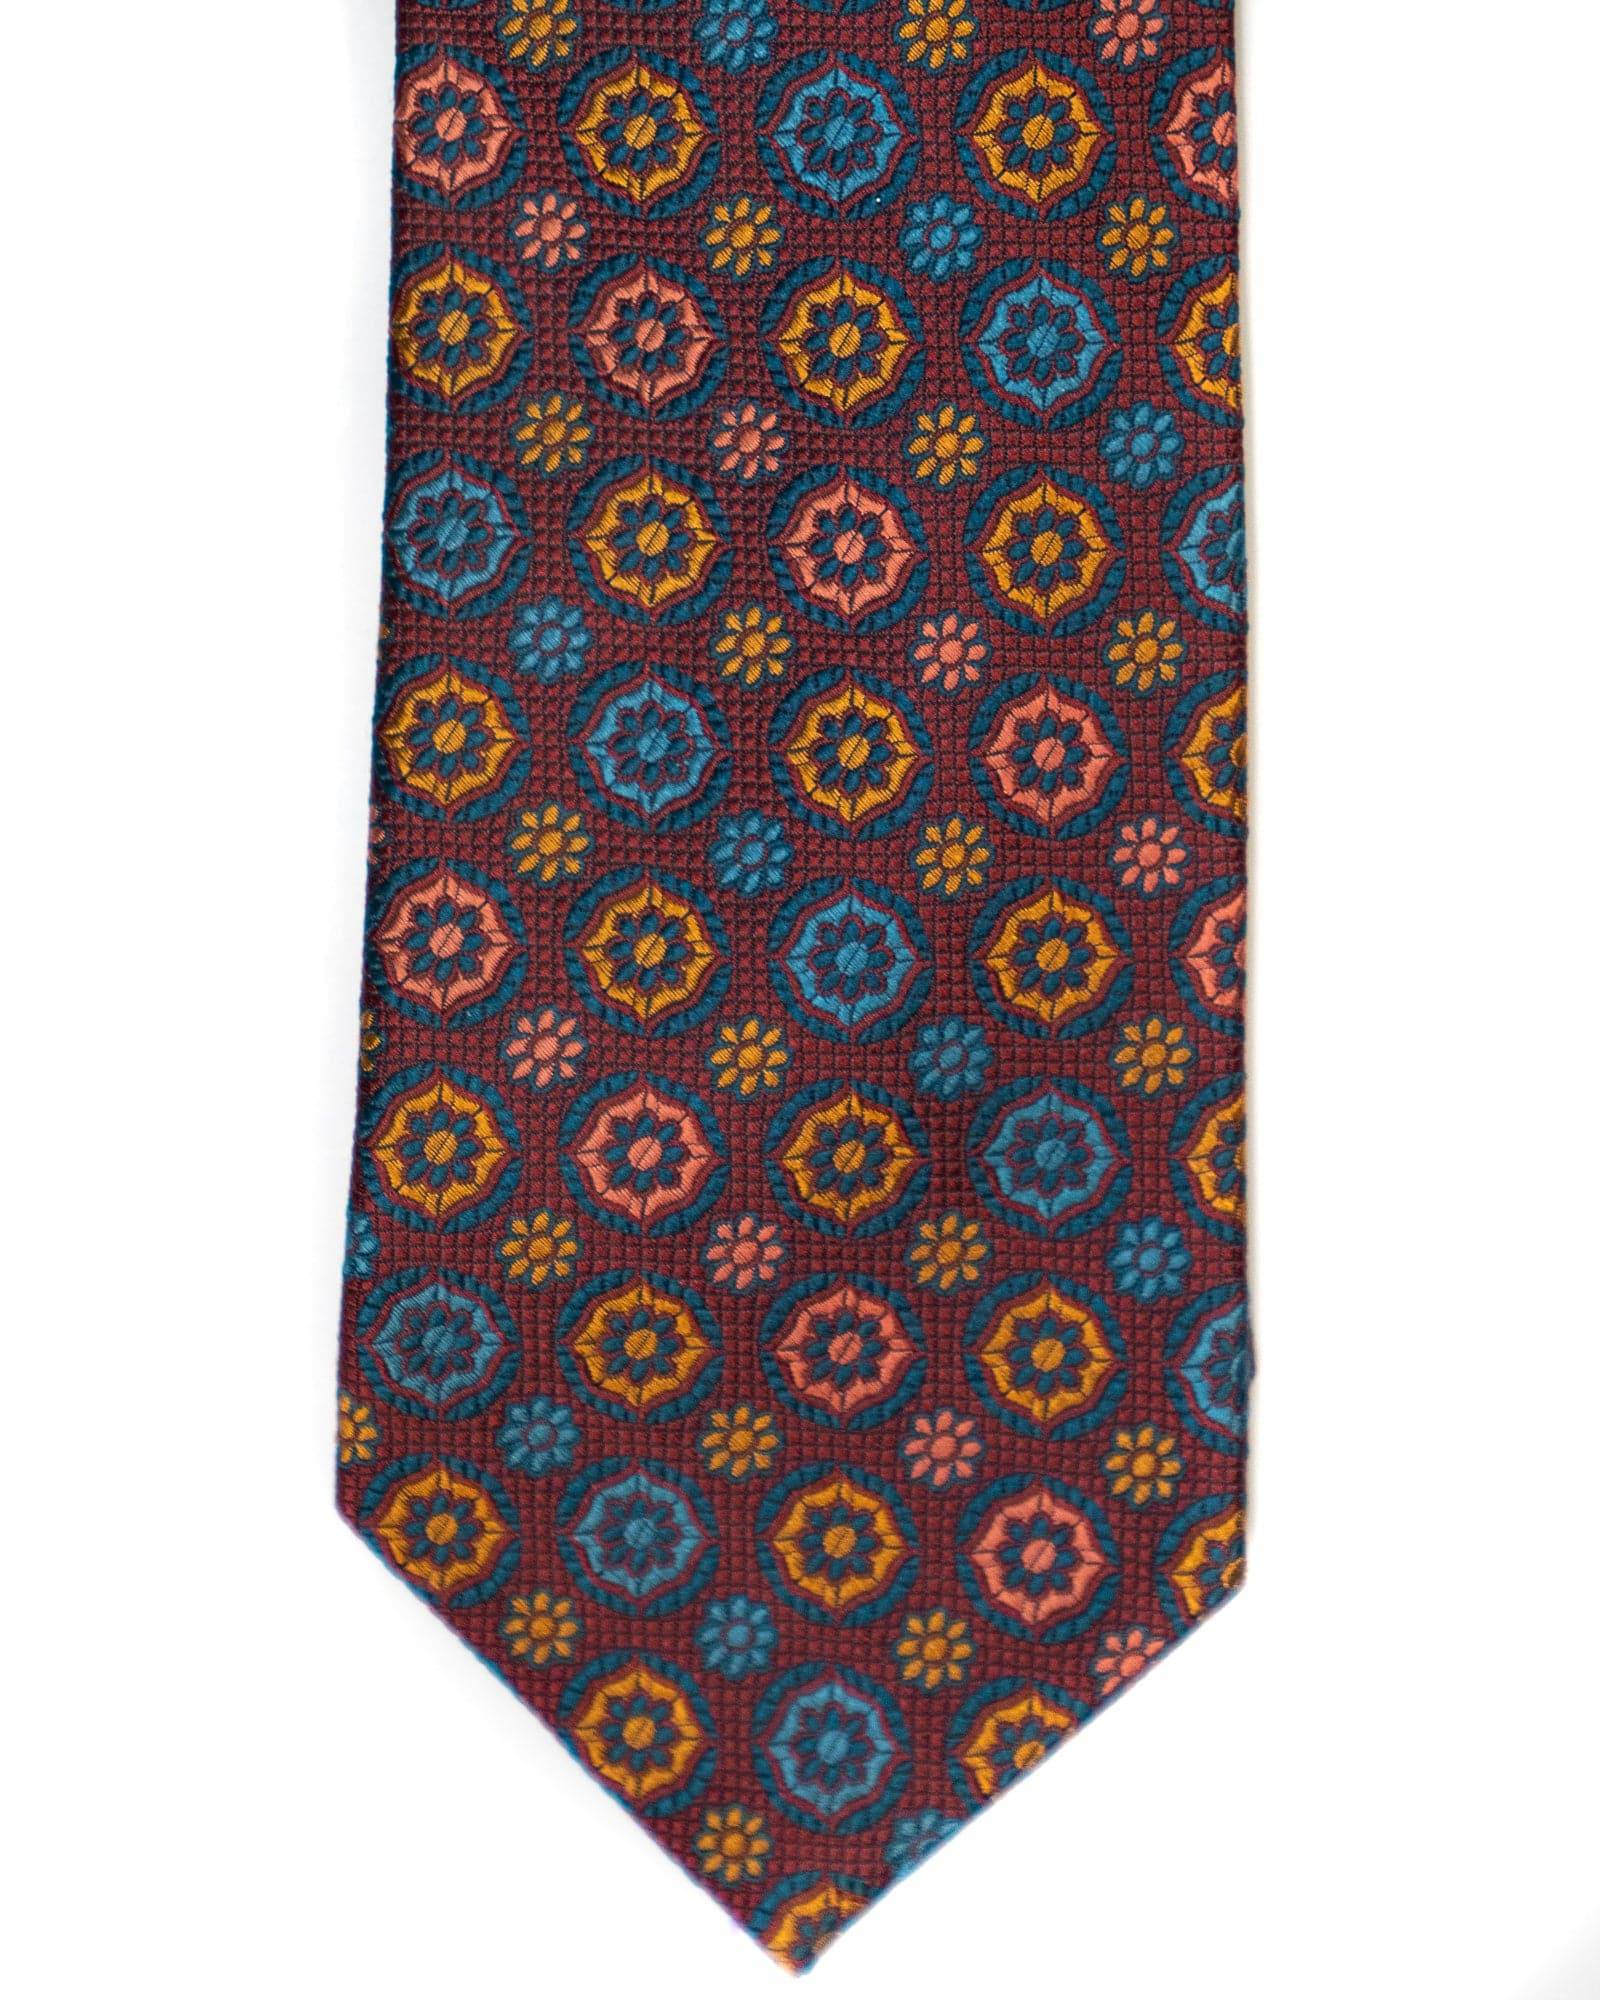 Silk Tie In Burgundy With Blue & Gold Foulard Print - Rainwater's Men's Clothing and Tuxedo Rental